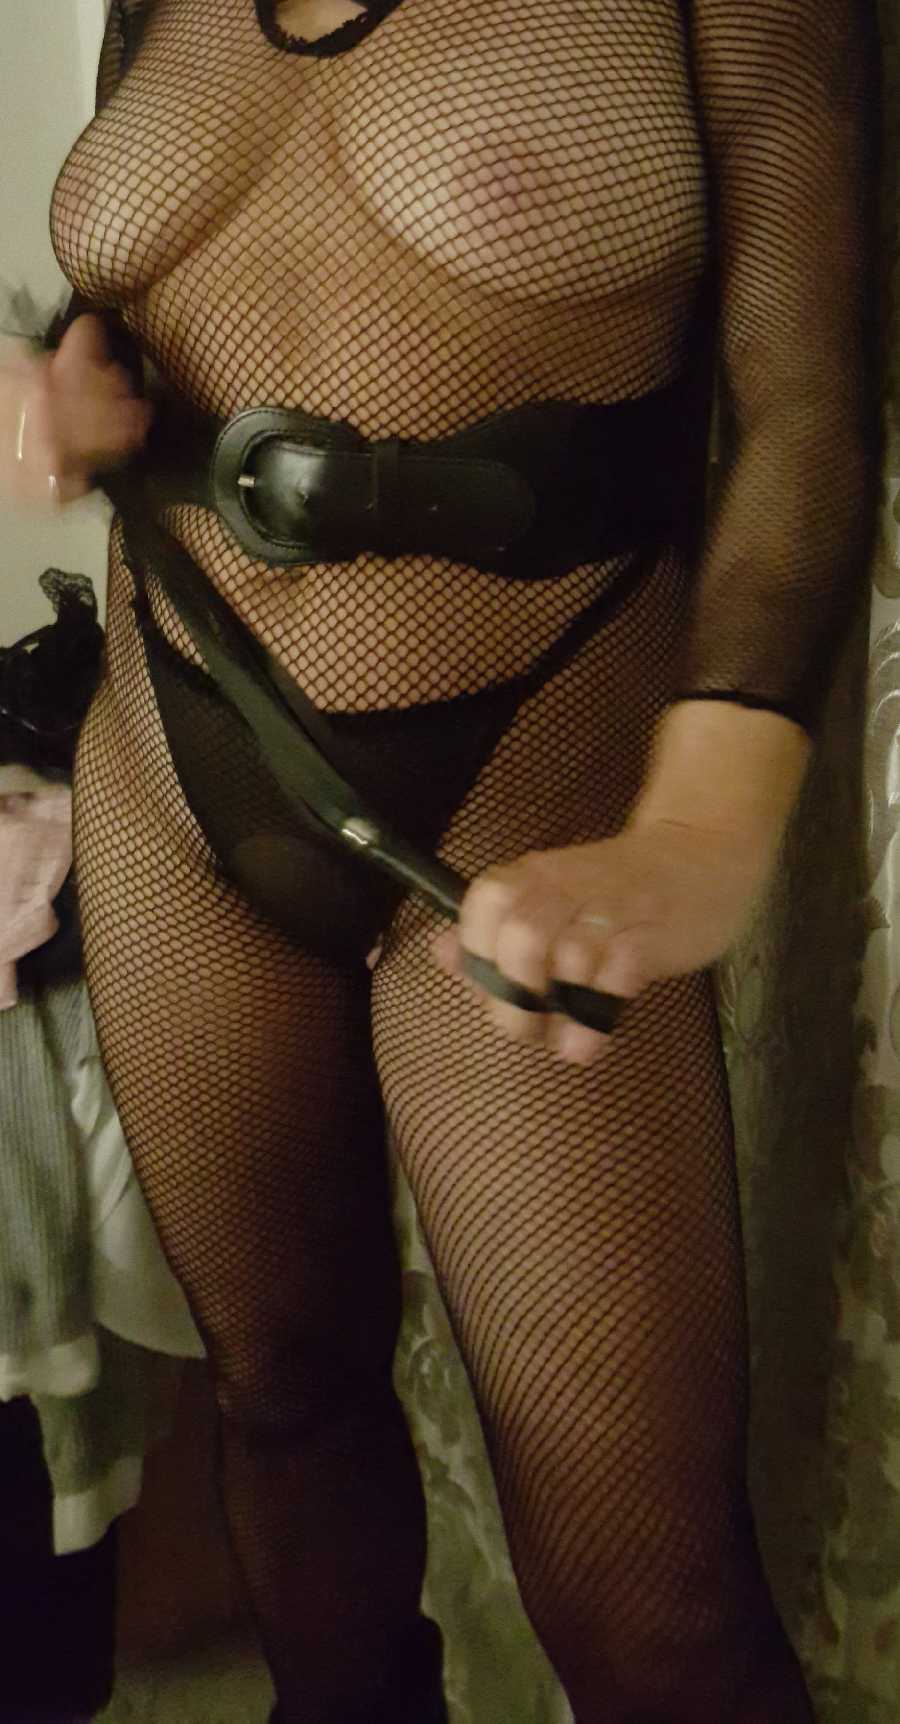 Looking for Naughty People